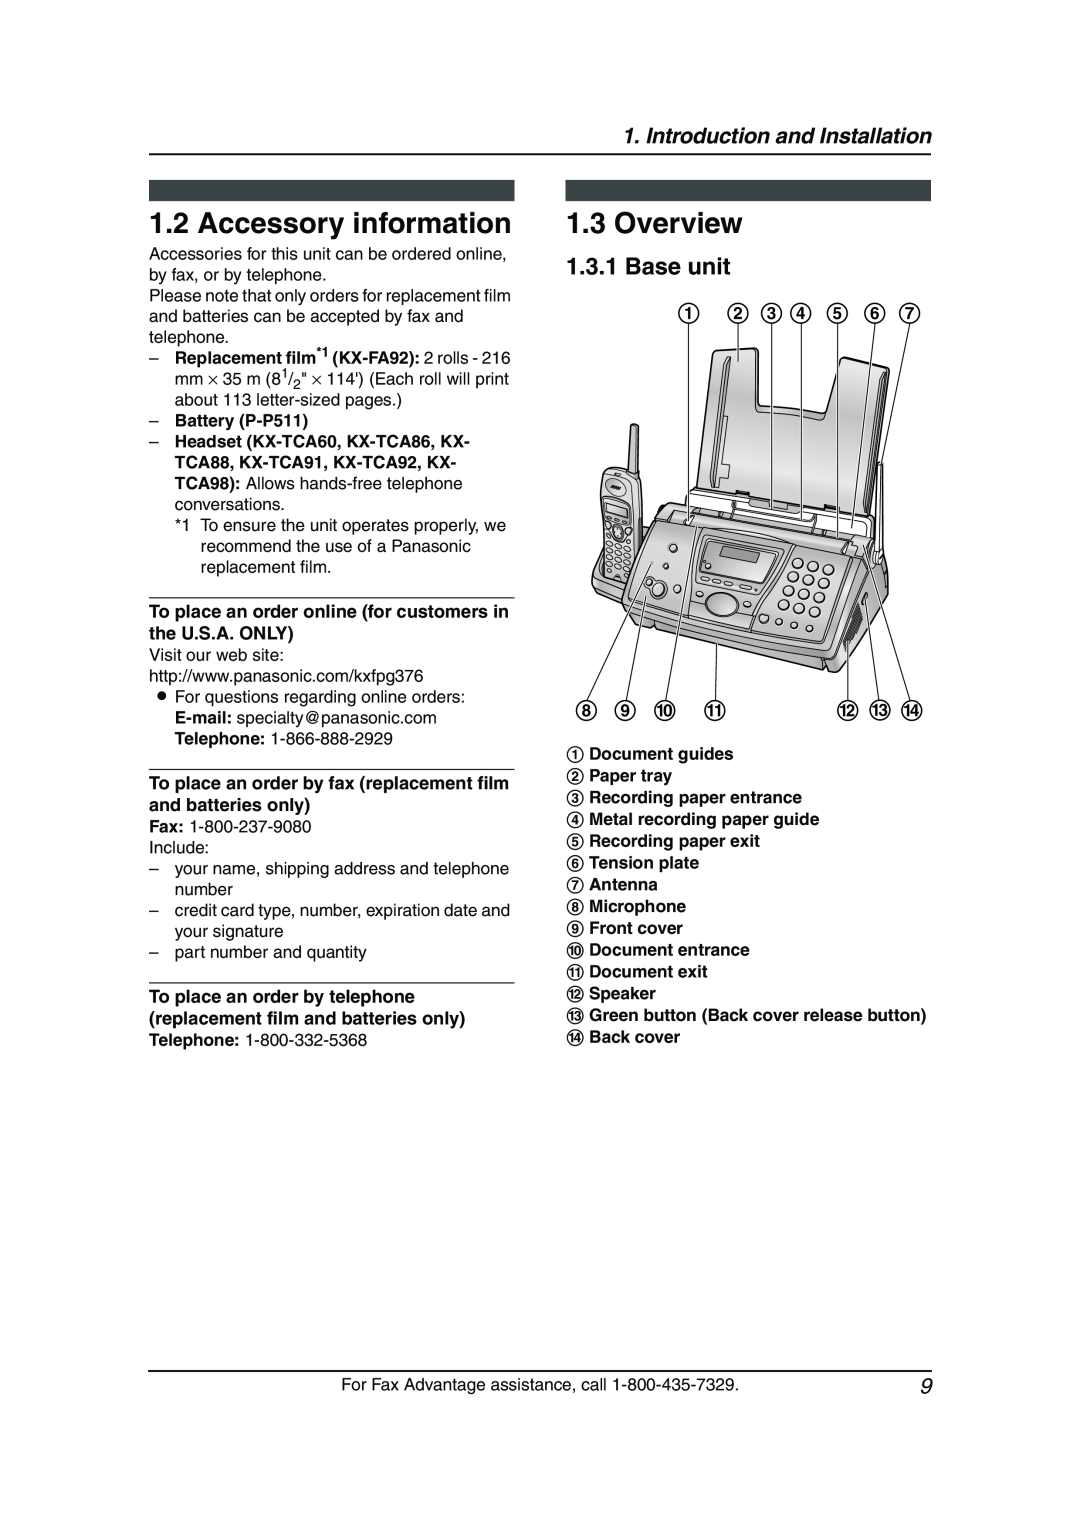 Panasonic KX-FPG377 Accessory information, Overview, Base unit, Introduction and Installation, 1 2 3 4 5 6, 8 9 j k, l m n 